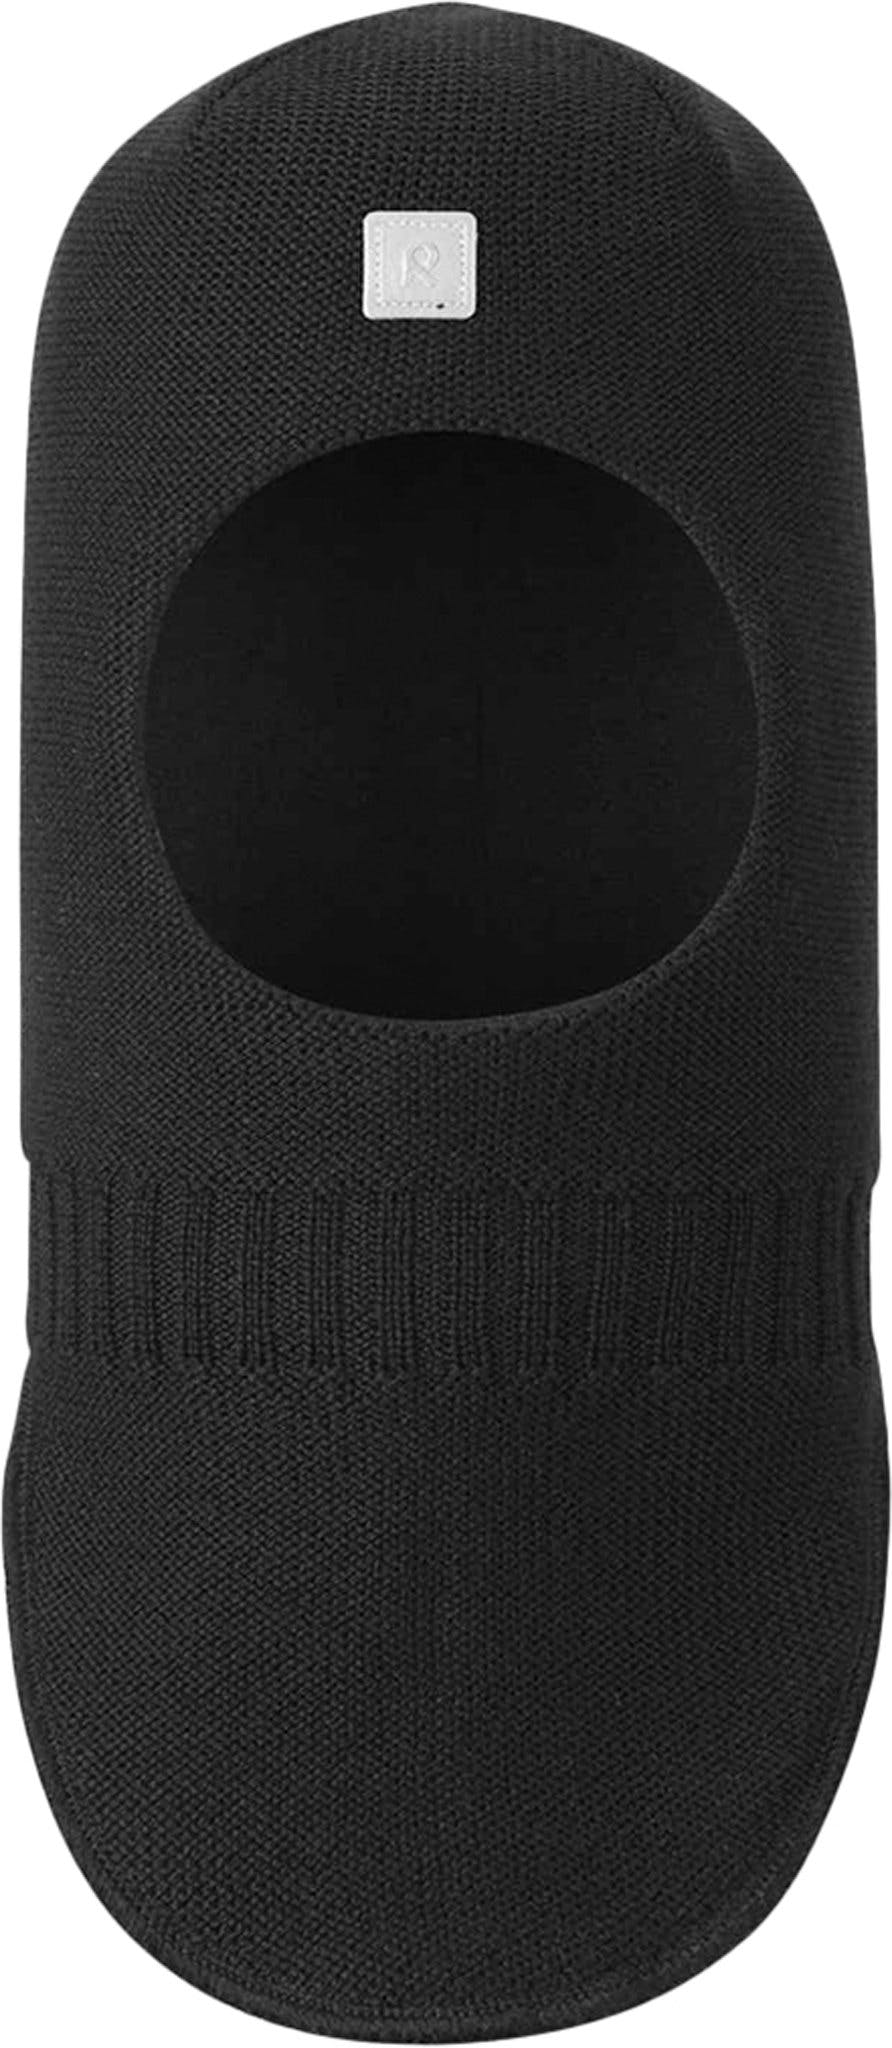 Product image for Starrie Wool Balaclava - Kids